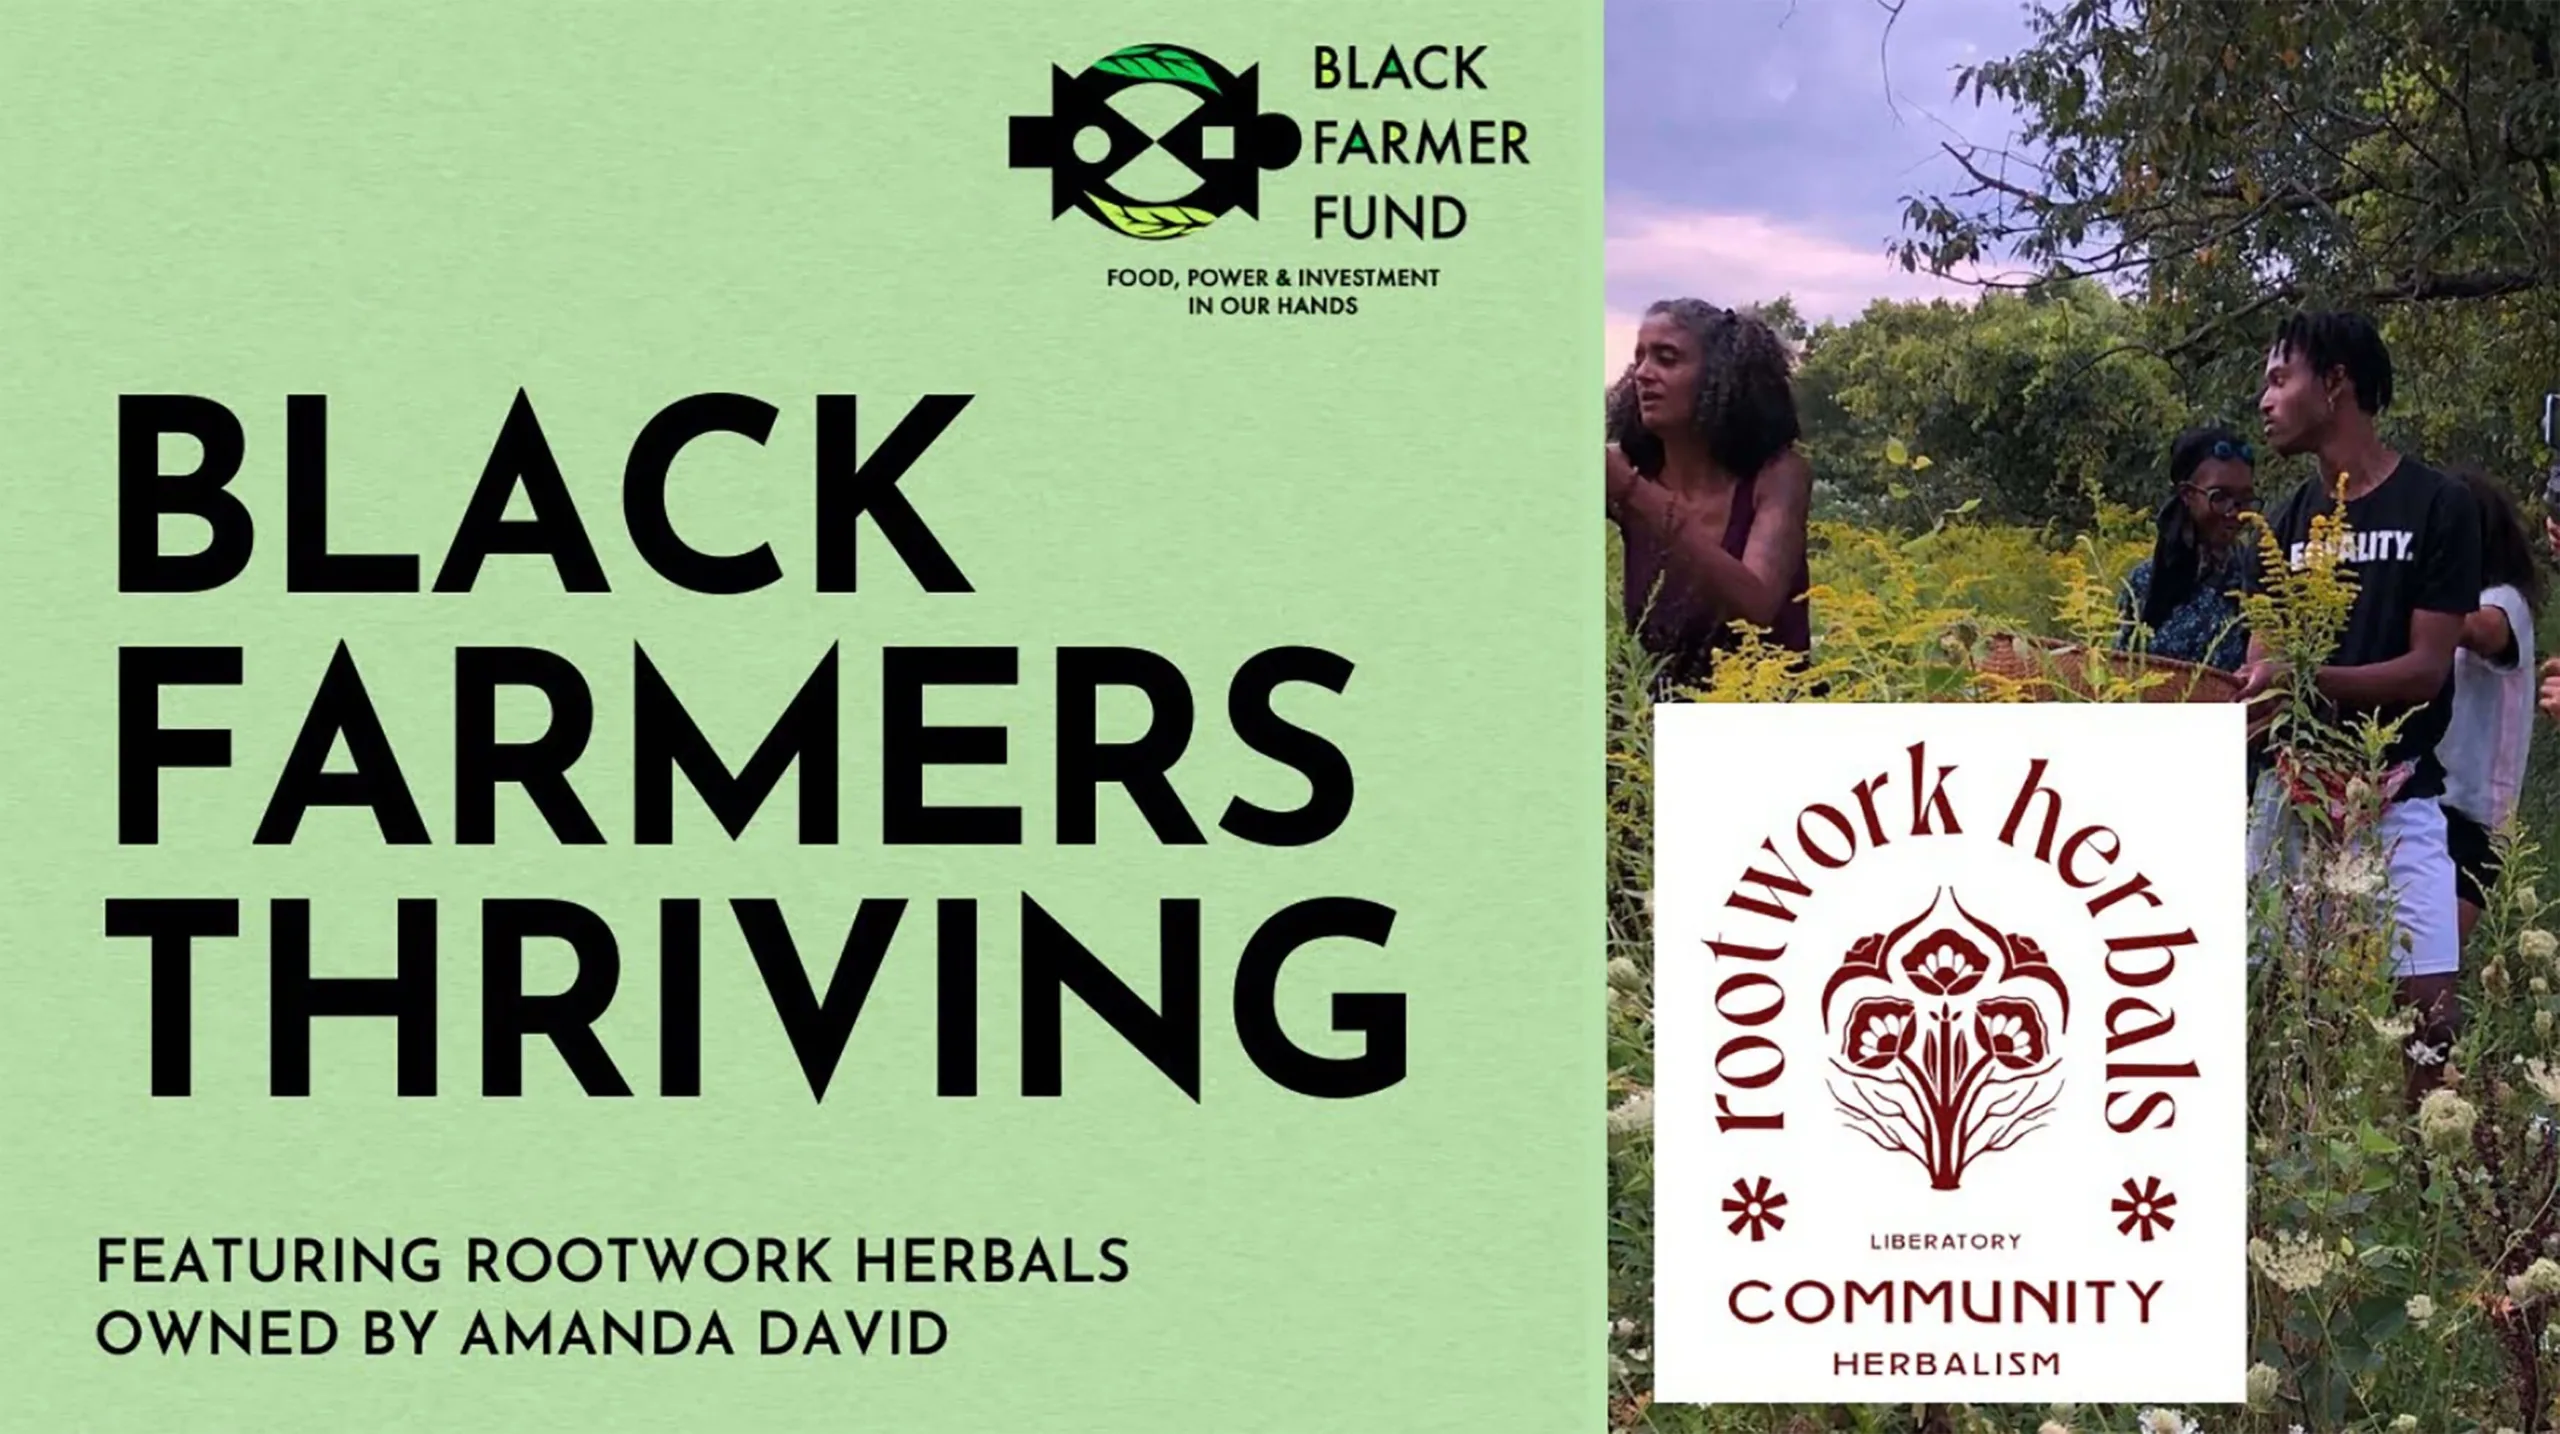 Featured image for “Black Farmer Fund”